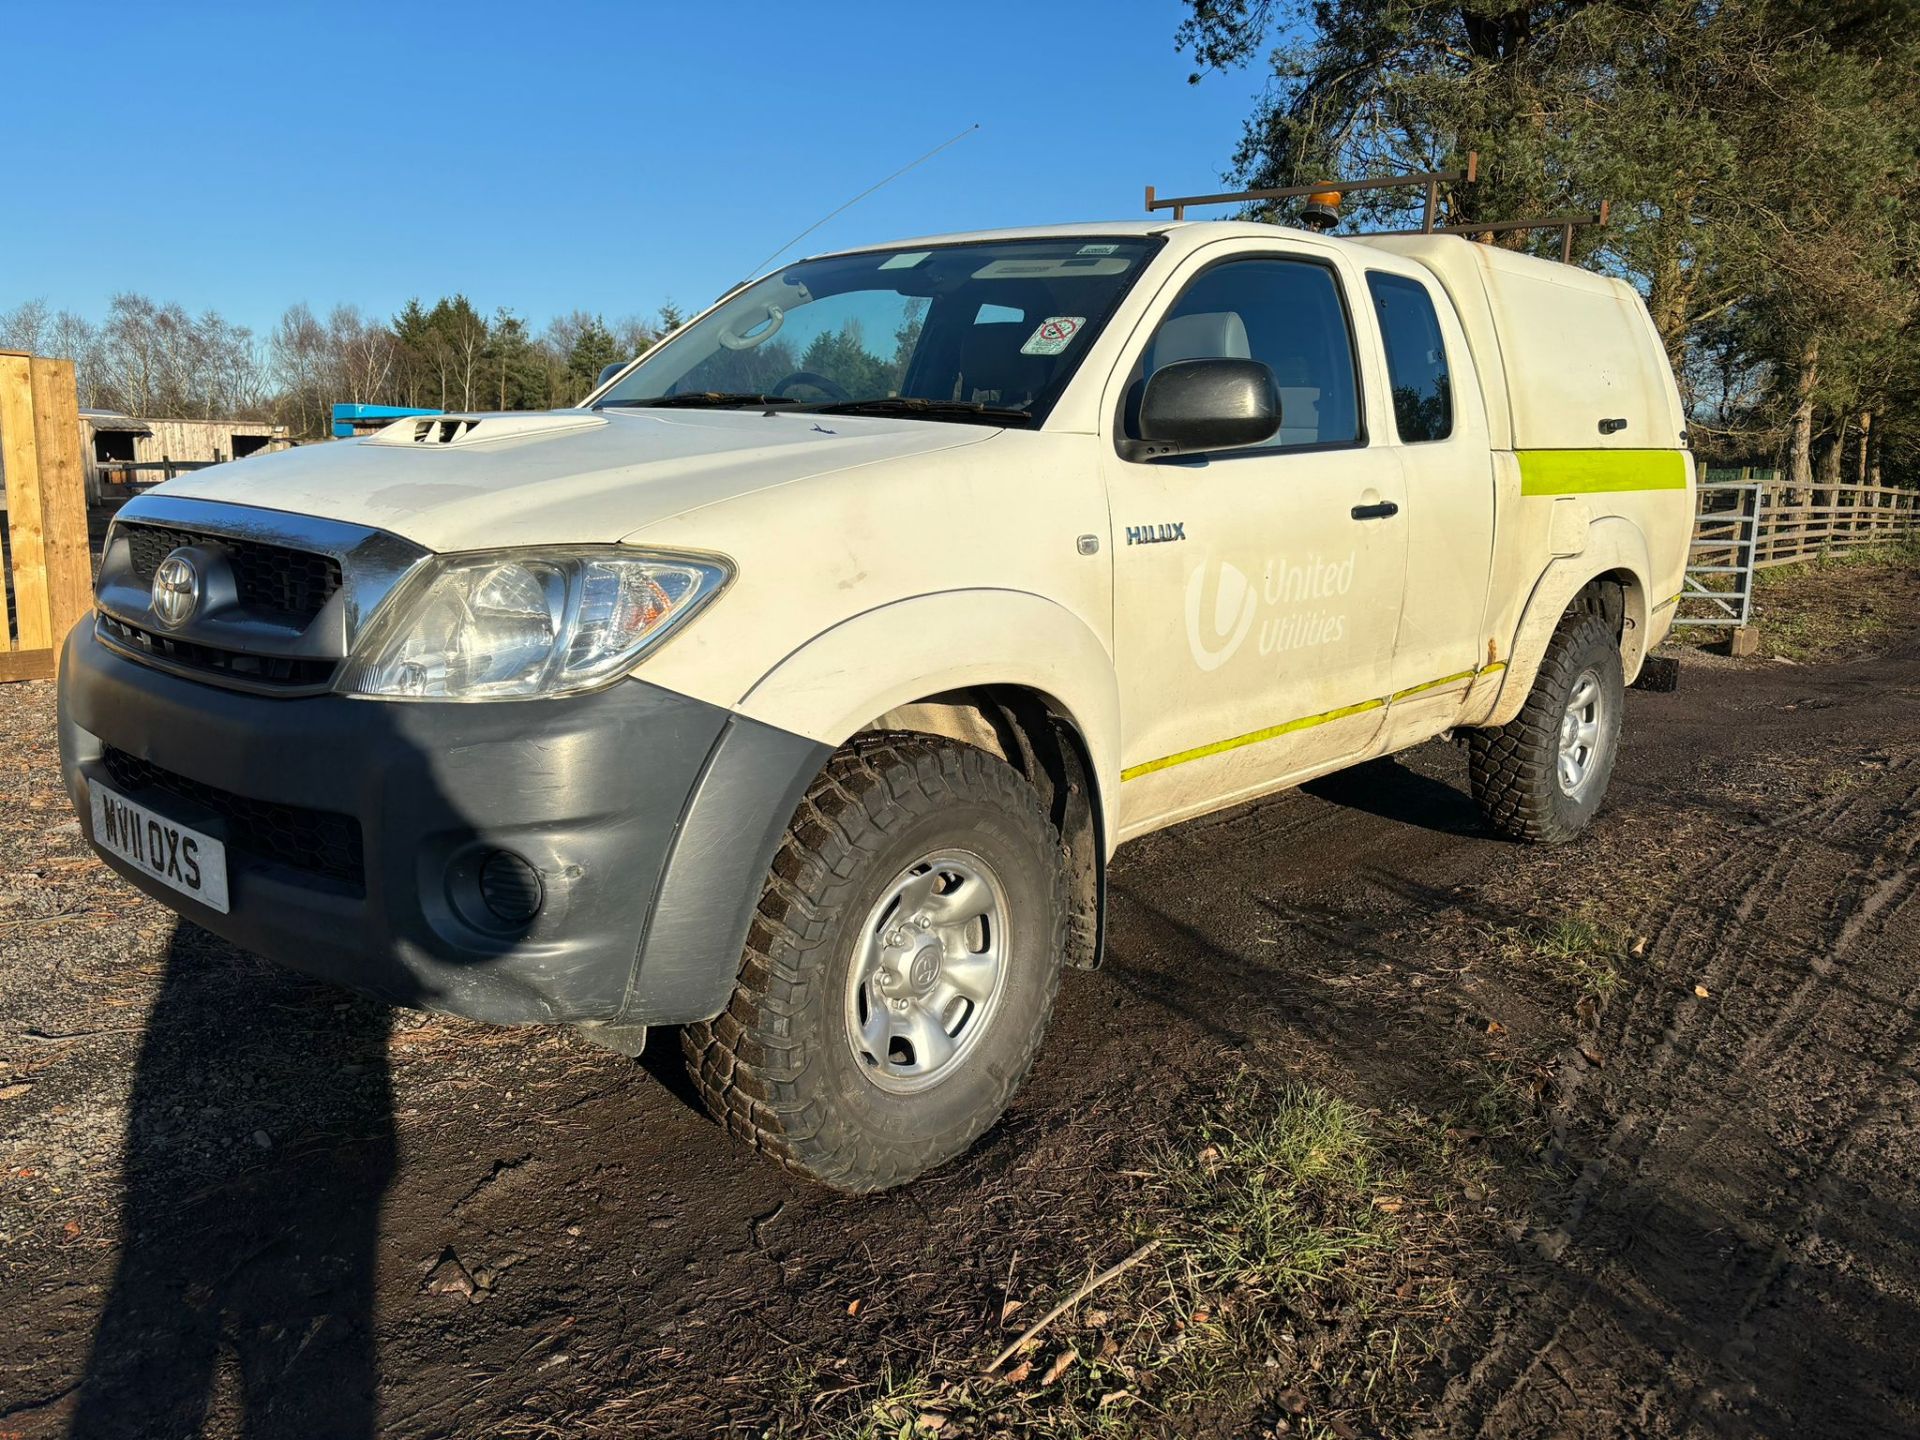 TOYOT HILUX 2011 KING CAB PICKUP TRUCK - Image 2 of 15